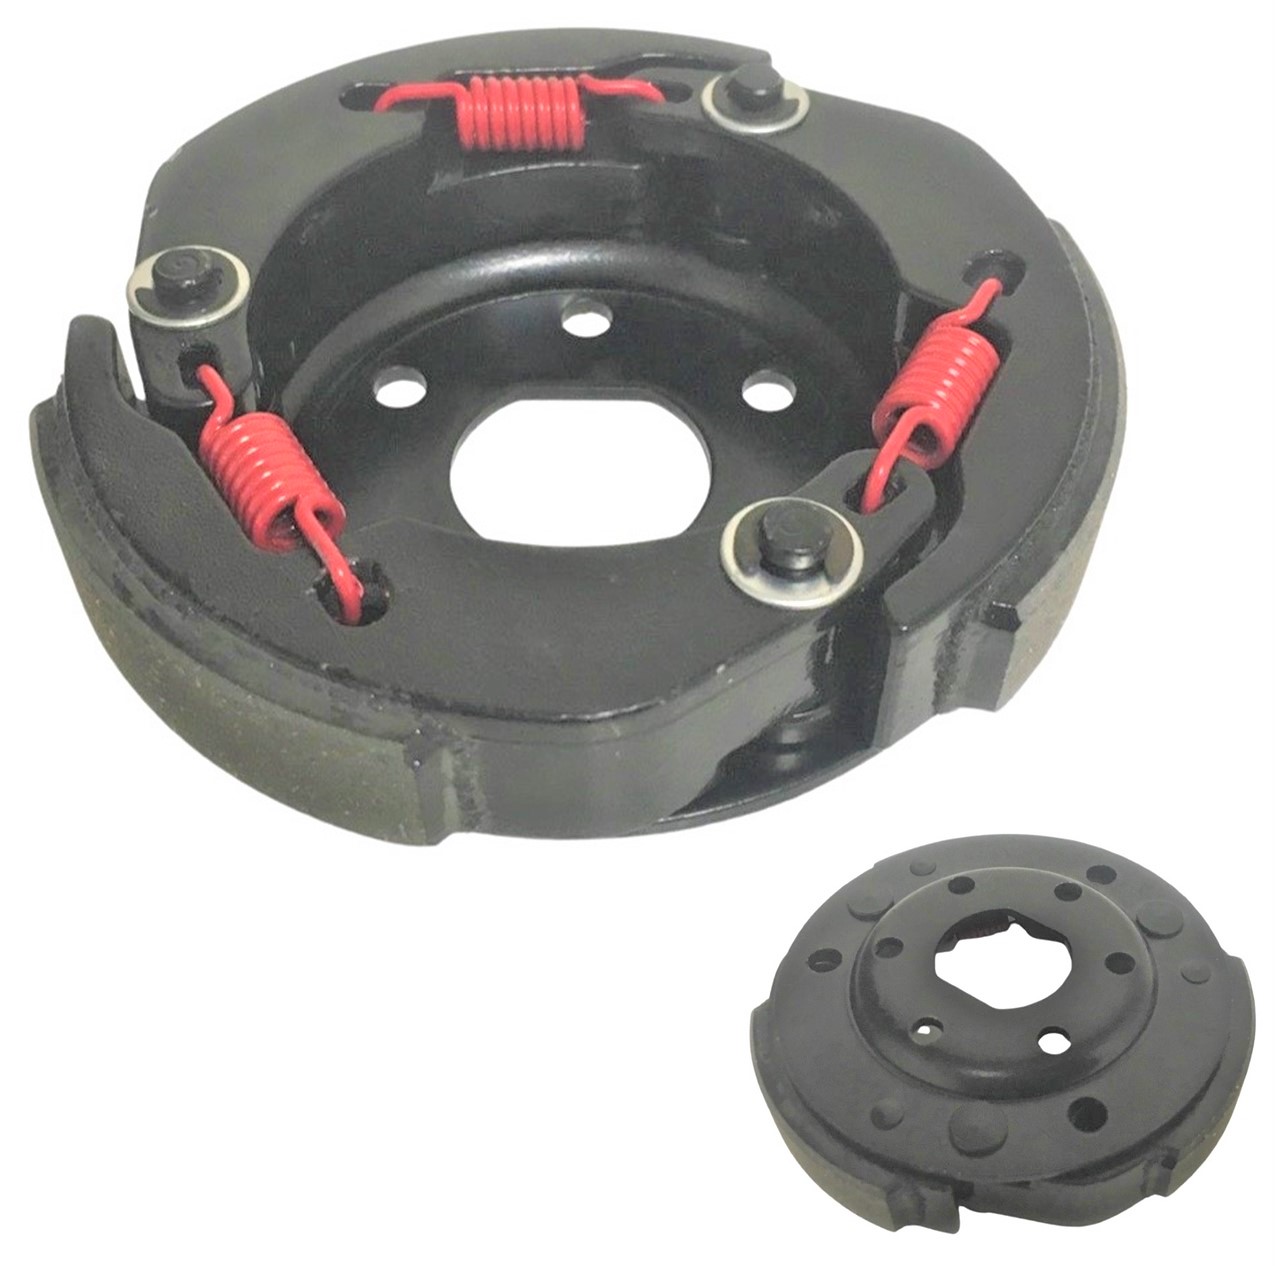 Inner Clutch 105mm HIGH PERFORMANCE RED Spring GY6-50 QMB139 49cc Chinese Scooter Motors - Click Image to Close